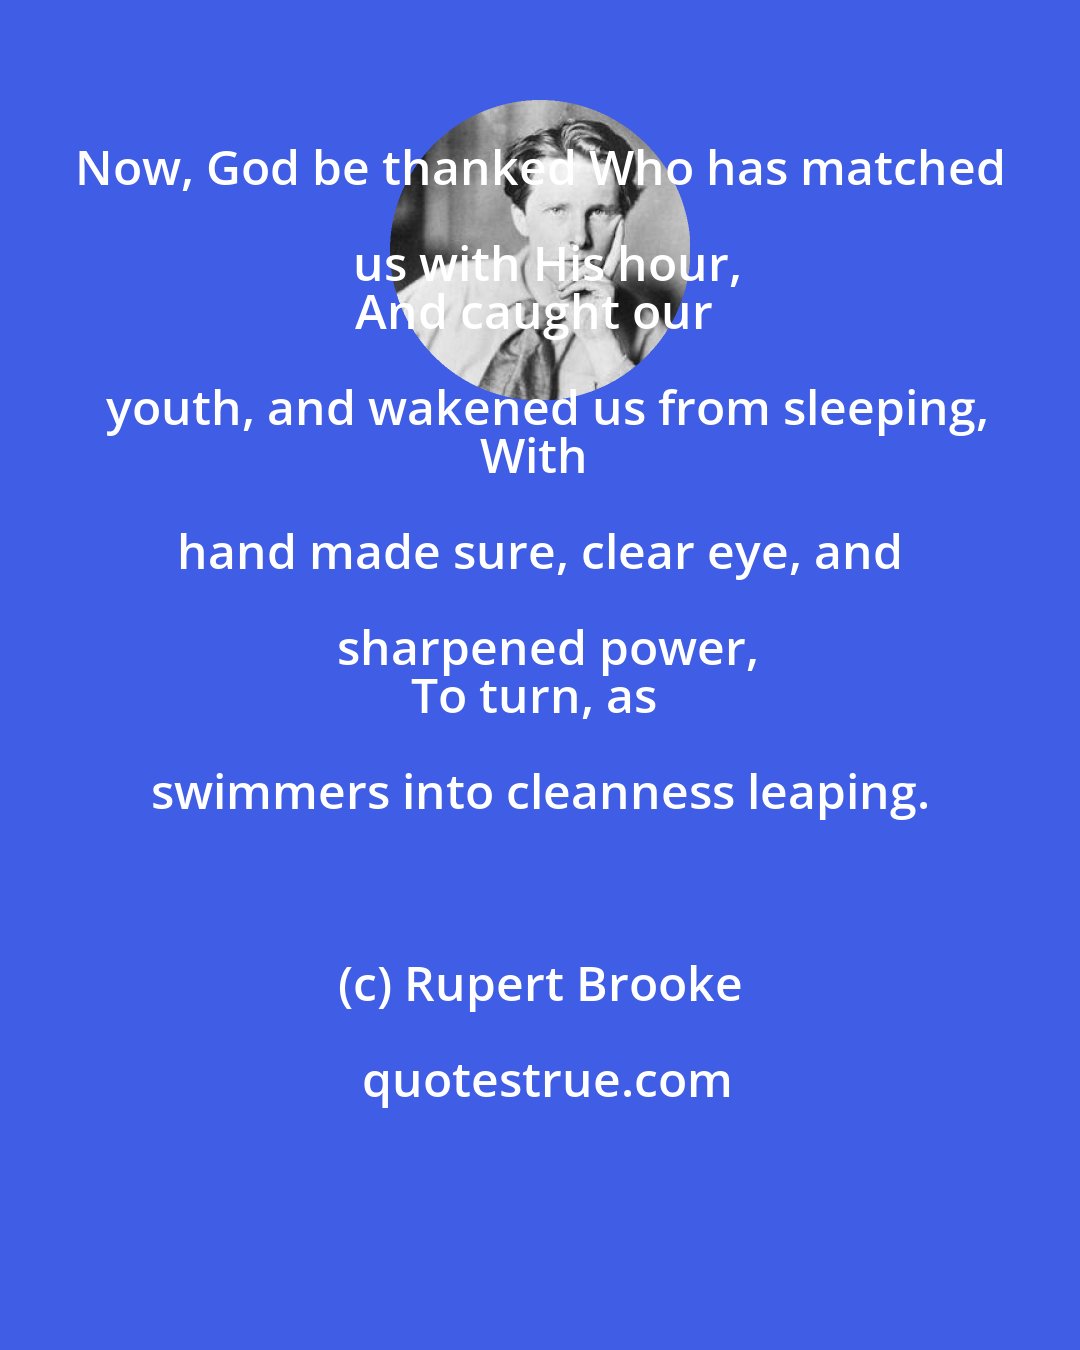 Rupert Brooke: Now, God be thanked Who has matched us with His hour,
And caught our youth, and wakened us from sleeping,
With hand made sure, clear eye, and sharpened power,
To turn, as swimmers into cleanness leaping.